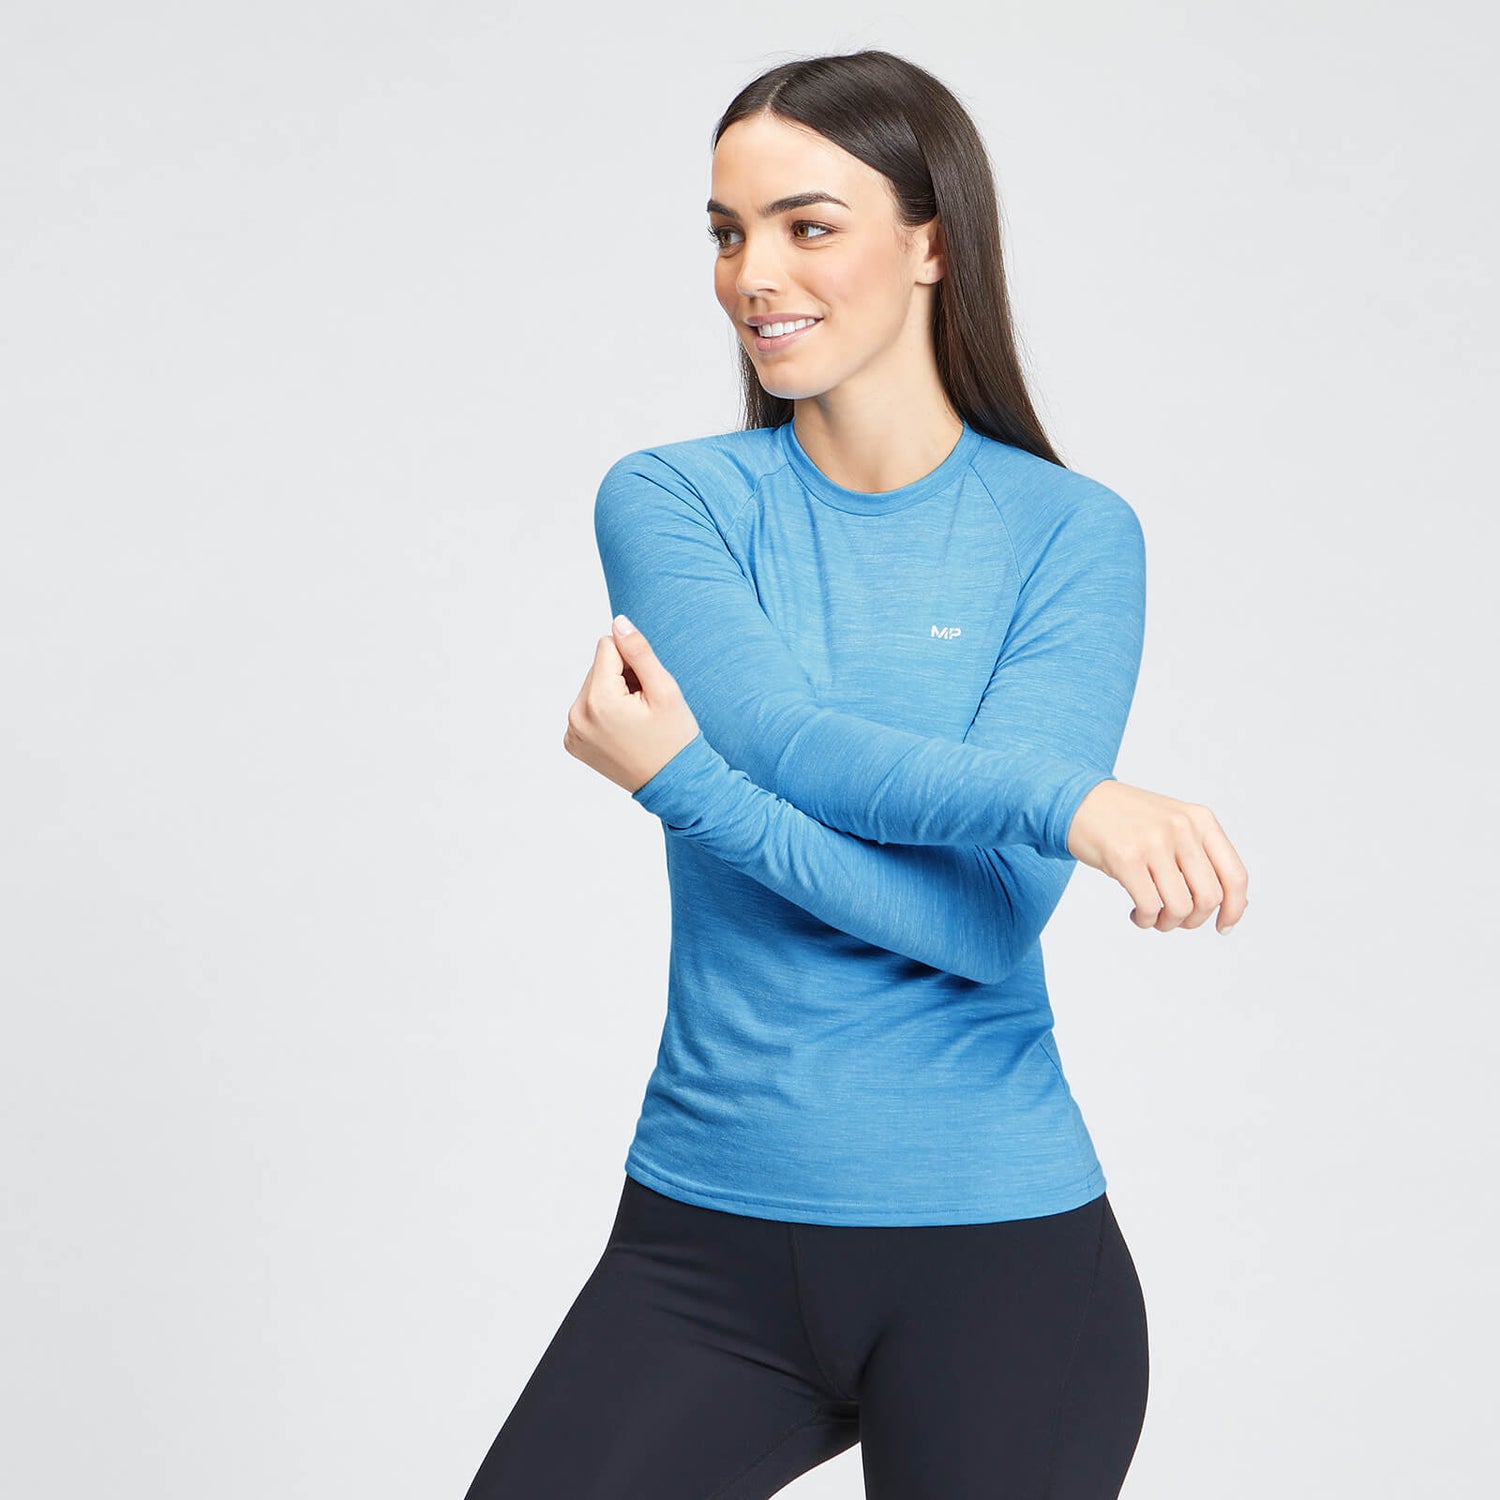 MP Women's Performance Long Sleeve Training T-Shirt - Bright Blue Marl with White Fleck